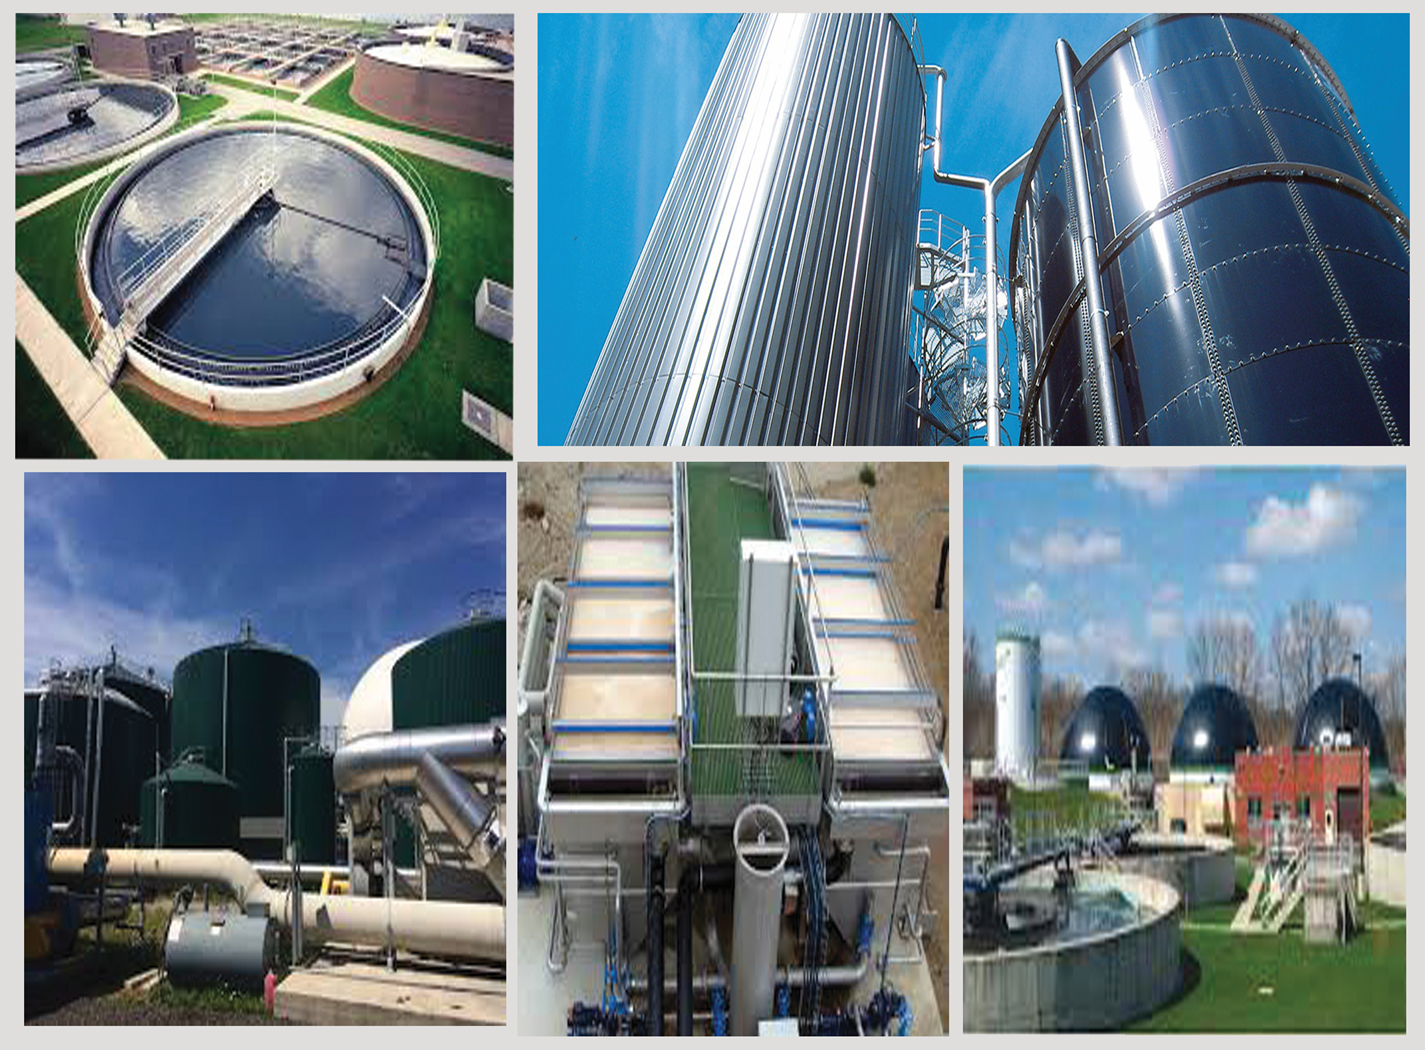 Industrial Waste Treatment